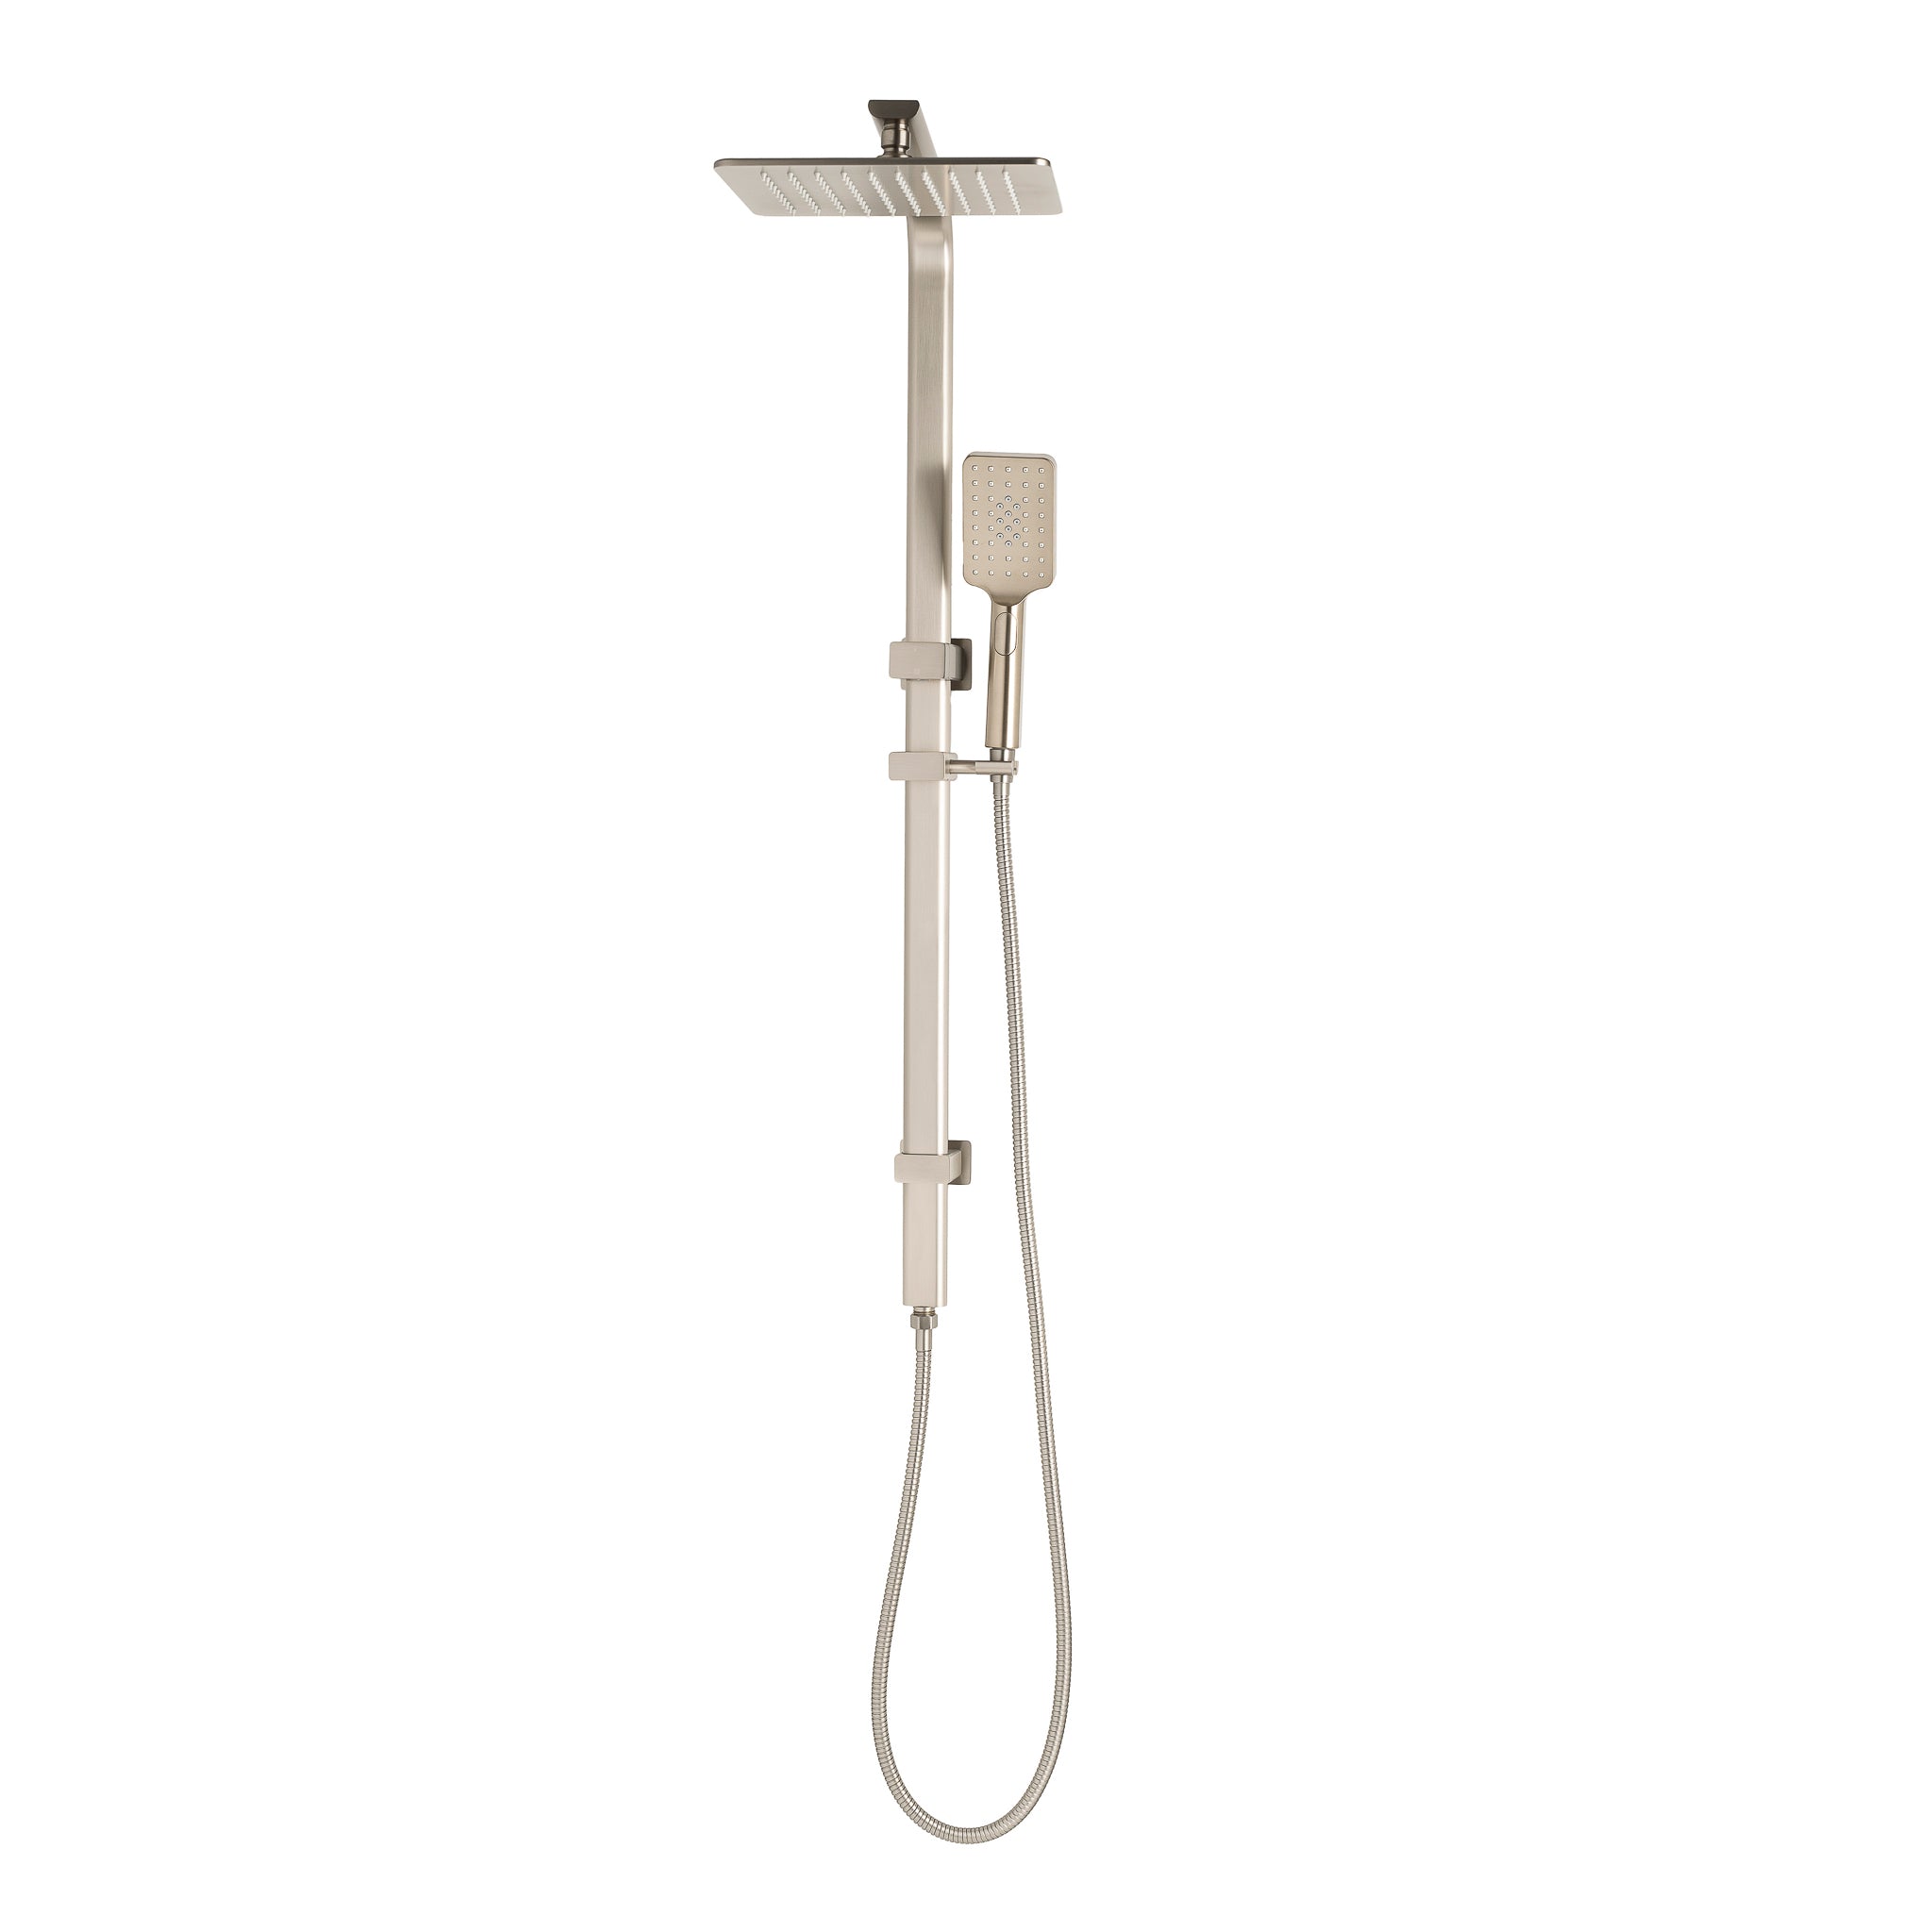 Retto Square Twin Shower System with Adjustable Rail and 250mm Head, Brushed Nickel